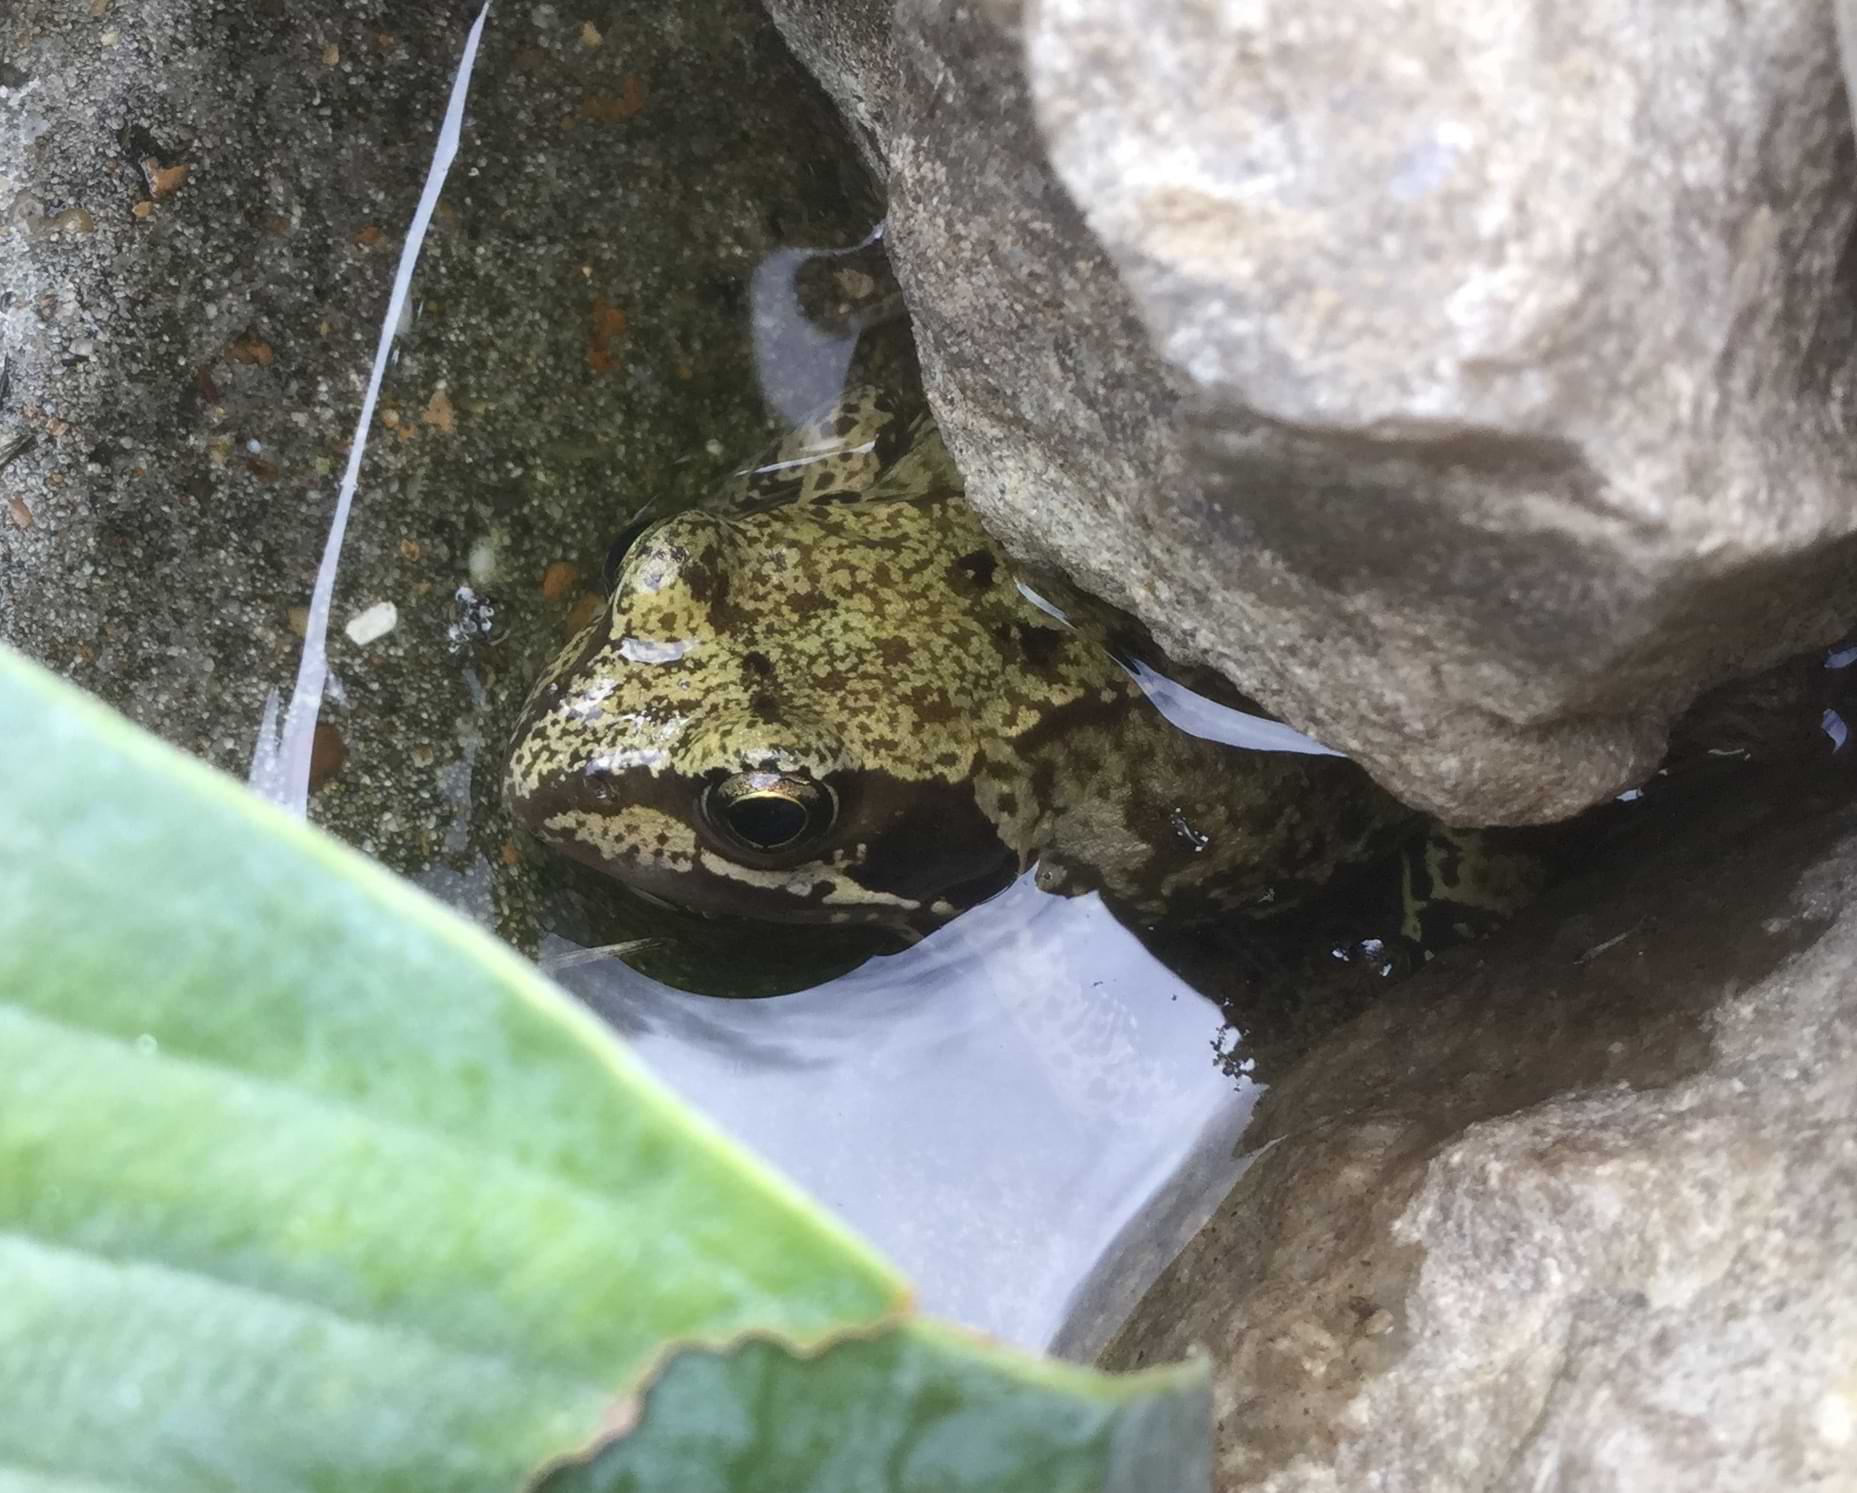 Photo of a small frog hiding under a rock and poking their head out of the water. The frog is a mixture of light and dark greens and has a mottled pattern to their skin.